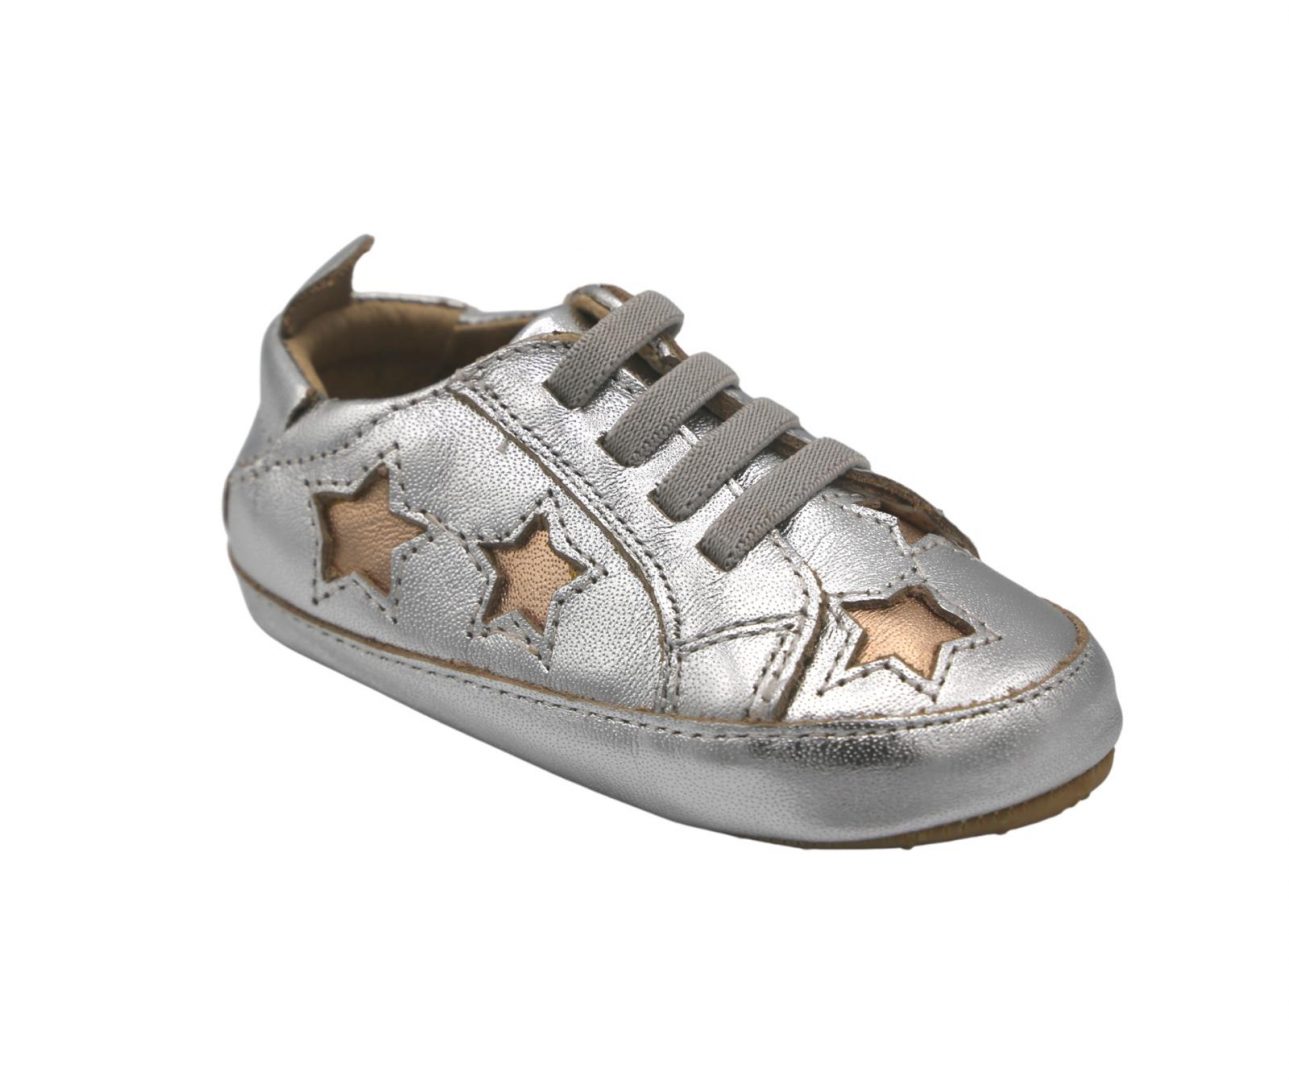 Oldsoles Starey Bambini Leather Shoes - Happy Feet BoutiqueHappy Feet ...